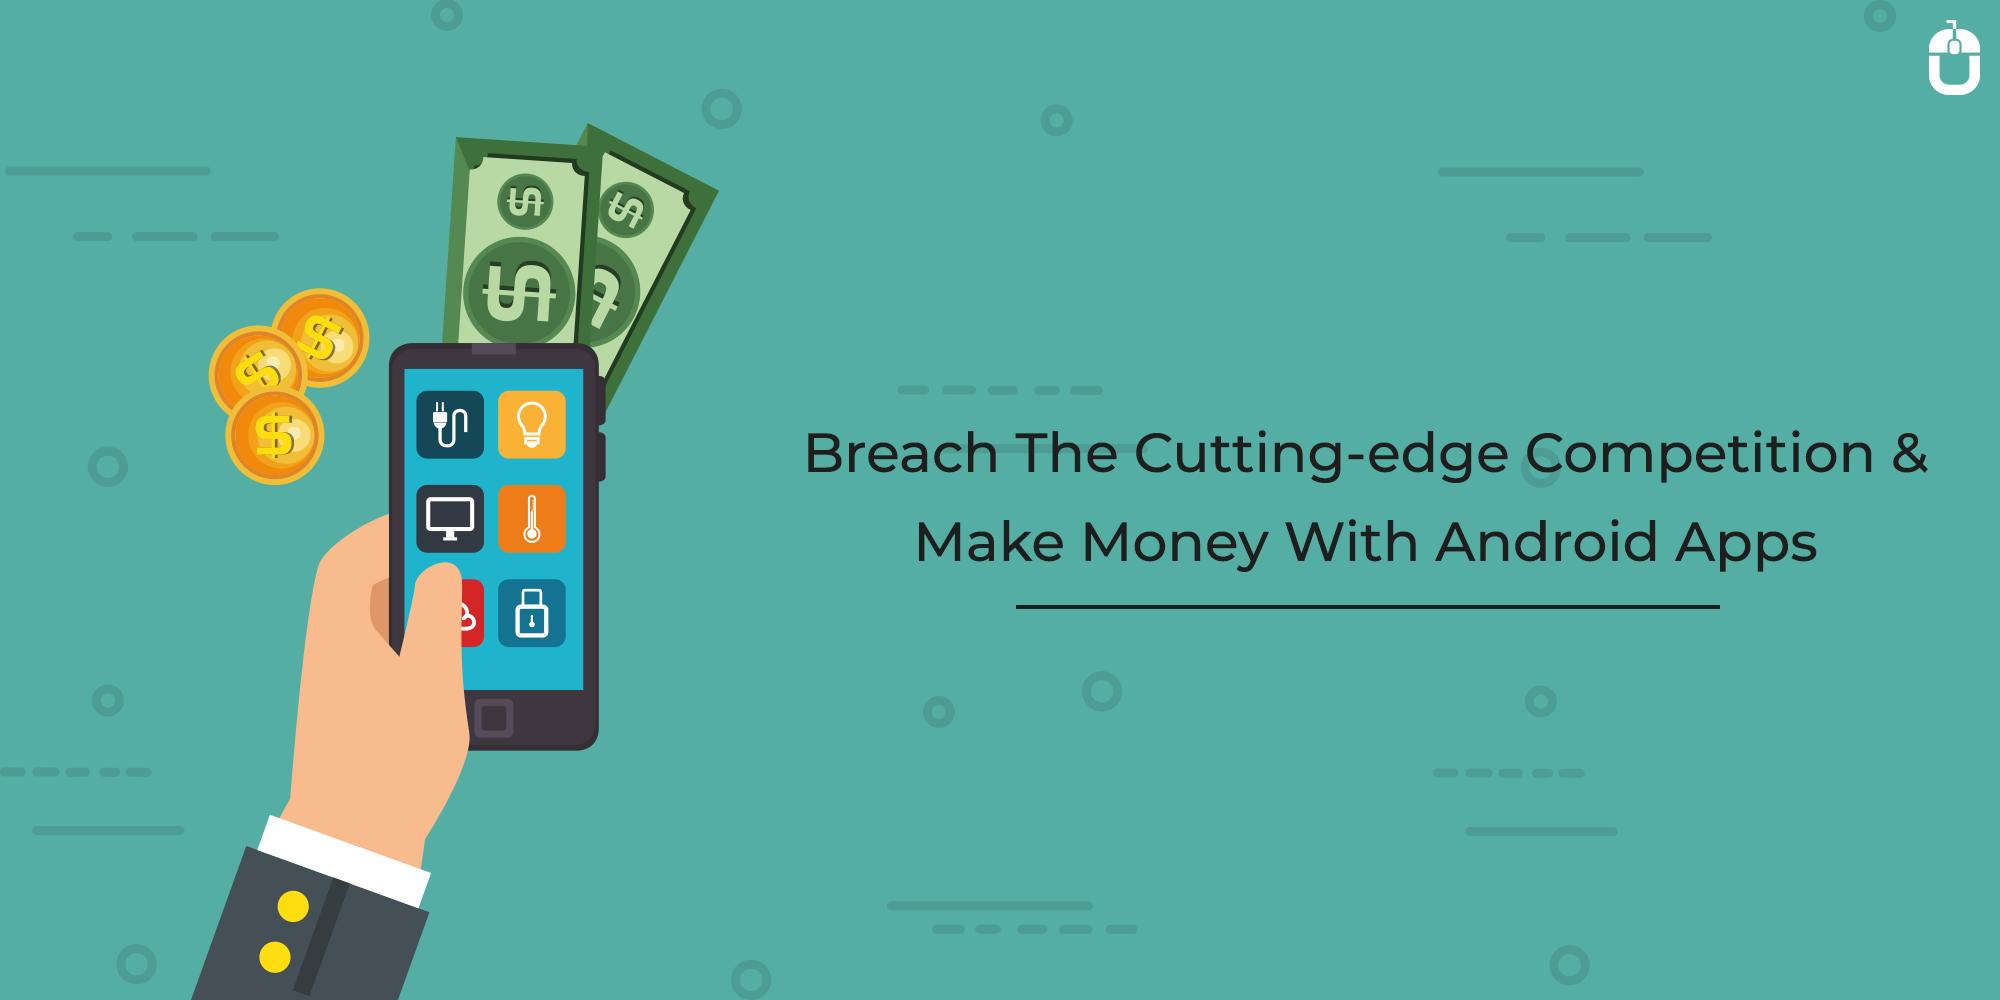 Breach The Cutting-Edge Competition & Make Money With Android Apps